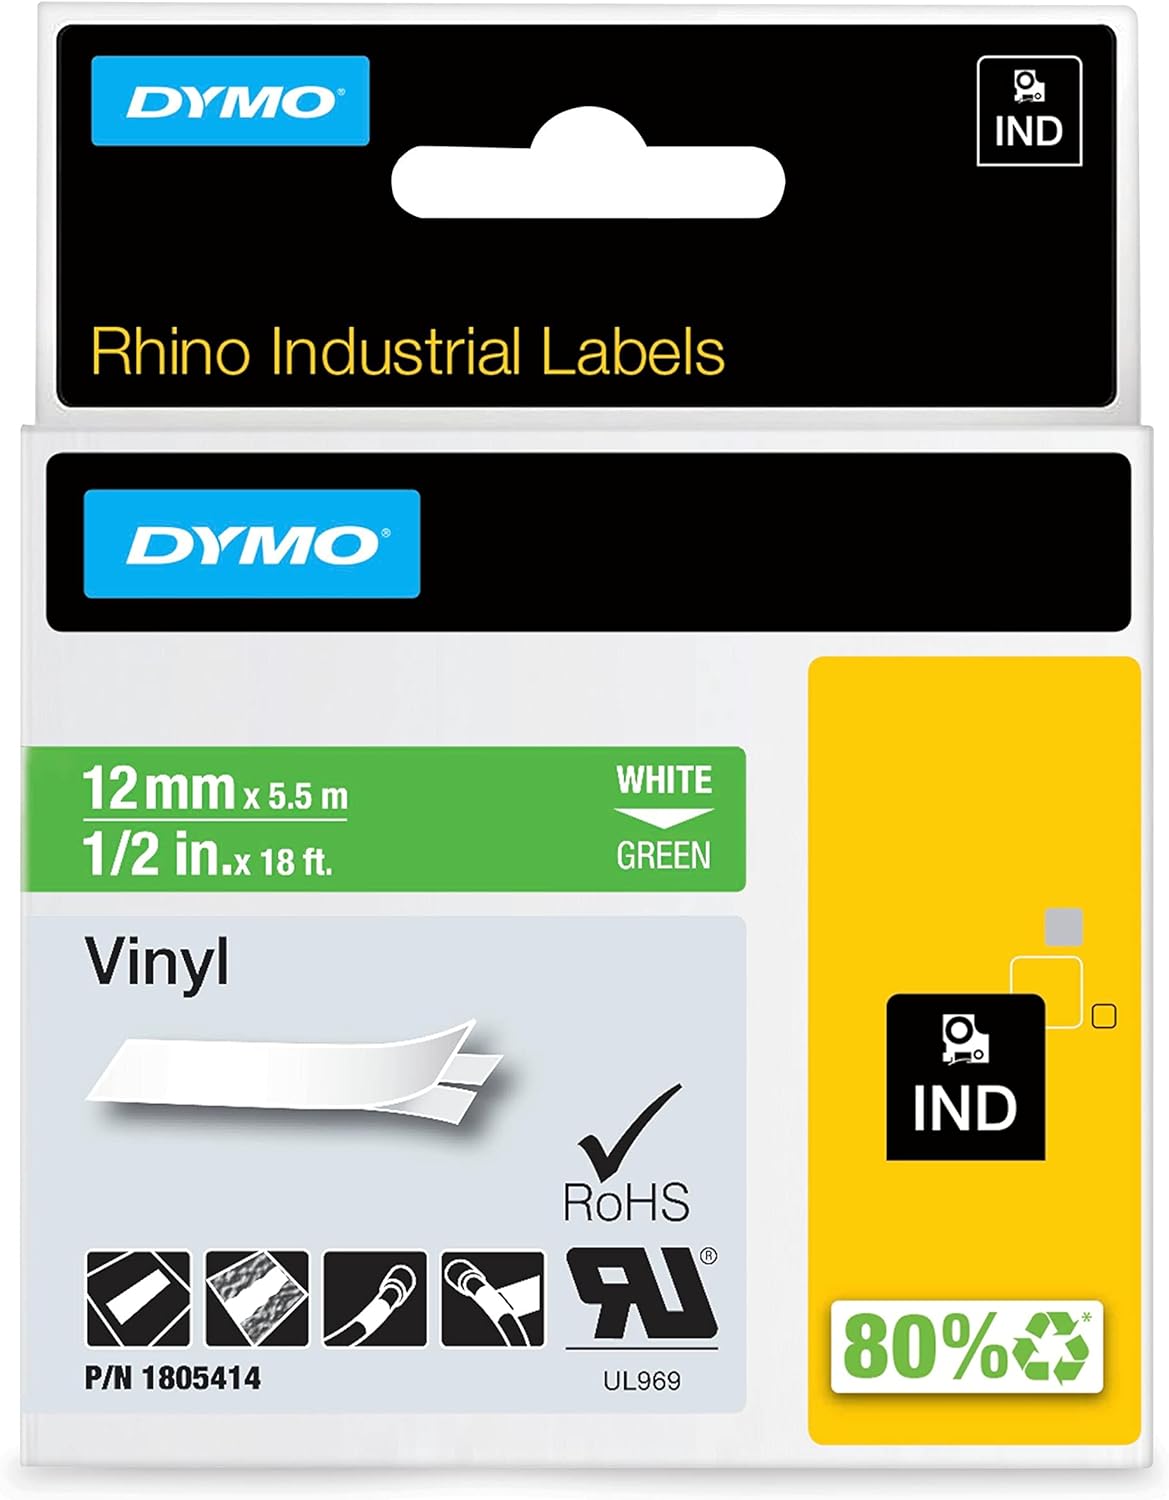 DYMO Industrial Labels for DYMO Industrial Rhino Label Makers, White on Green, 1/2", 1 Roll (1805414), DYMO Authentic